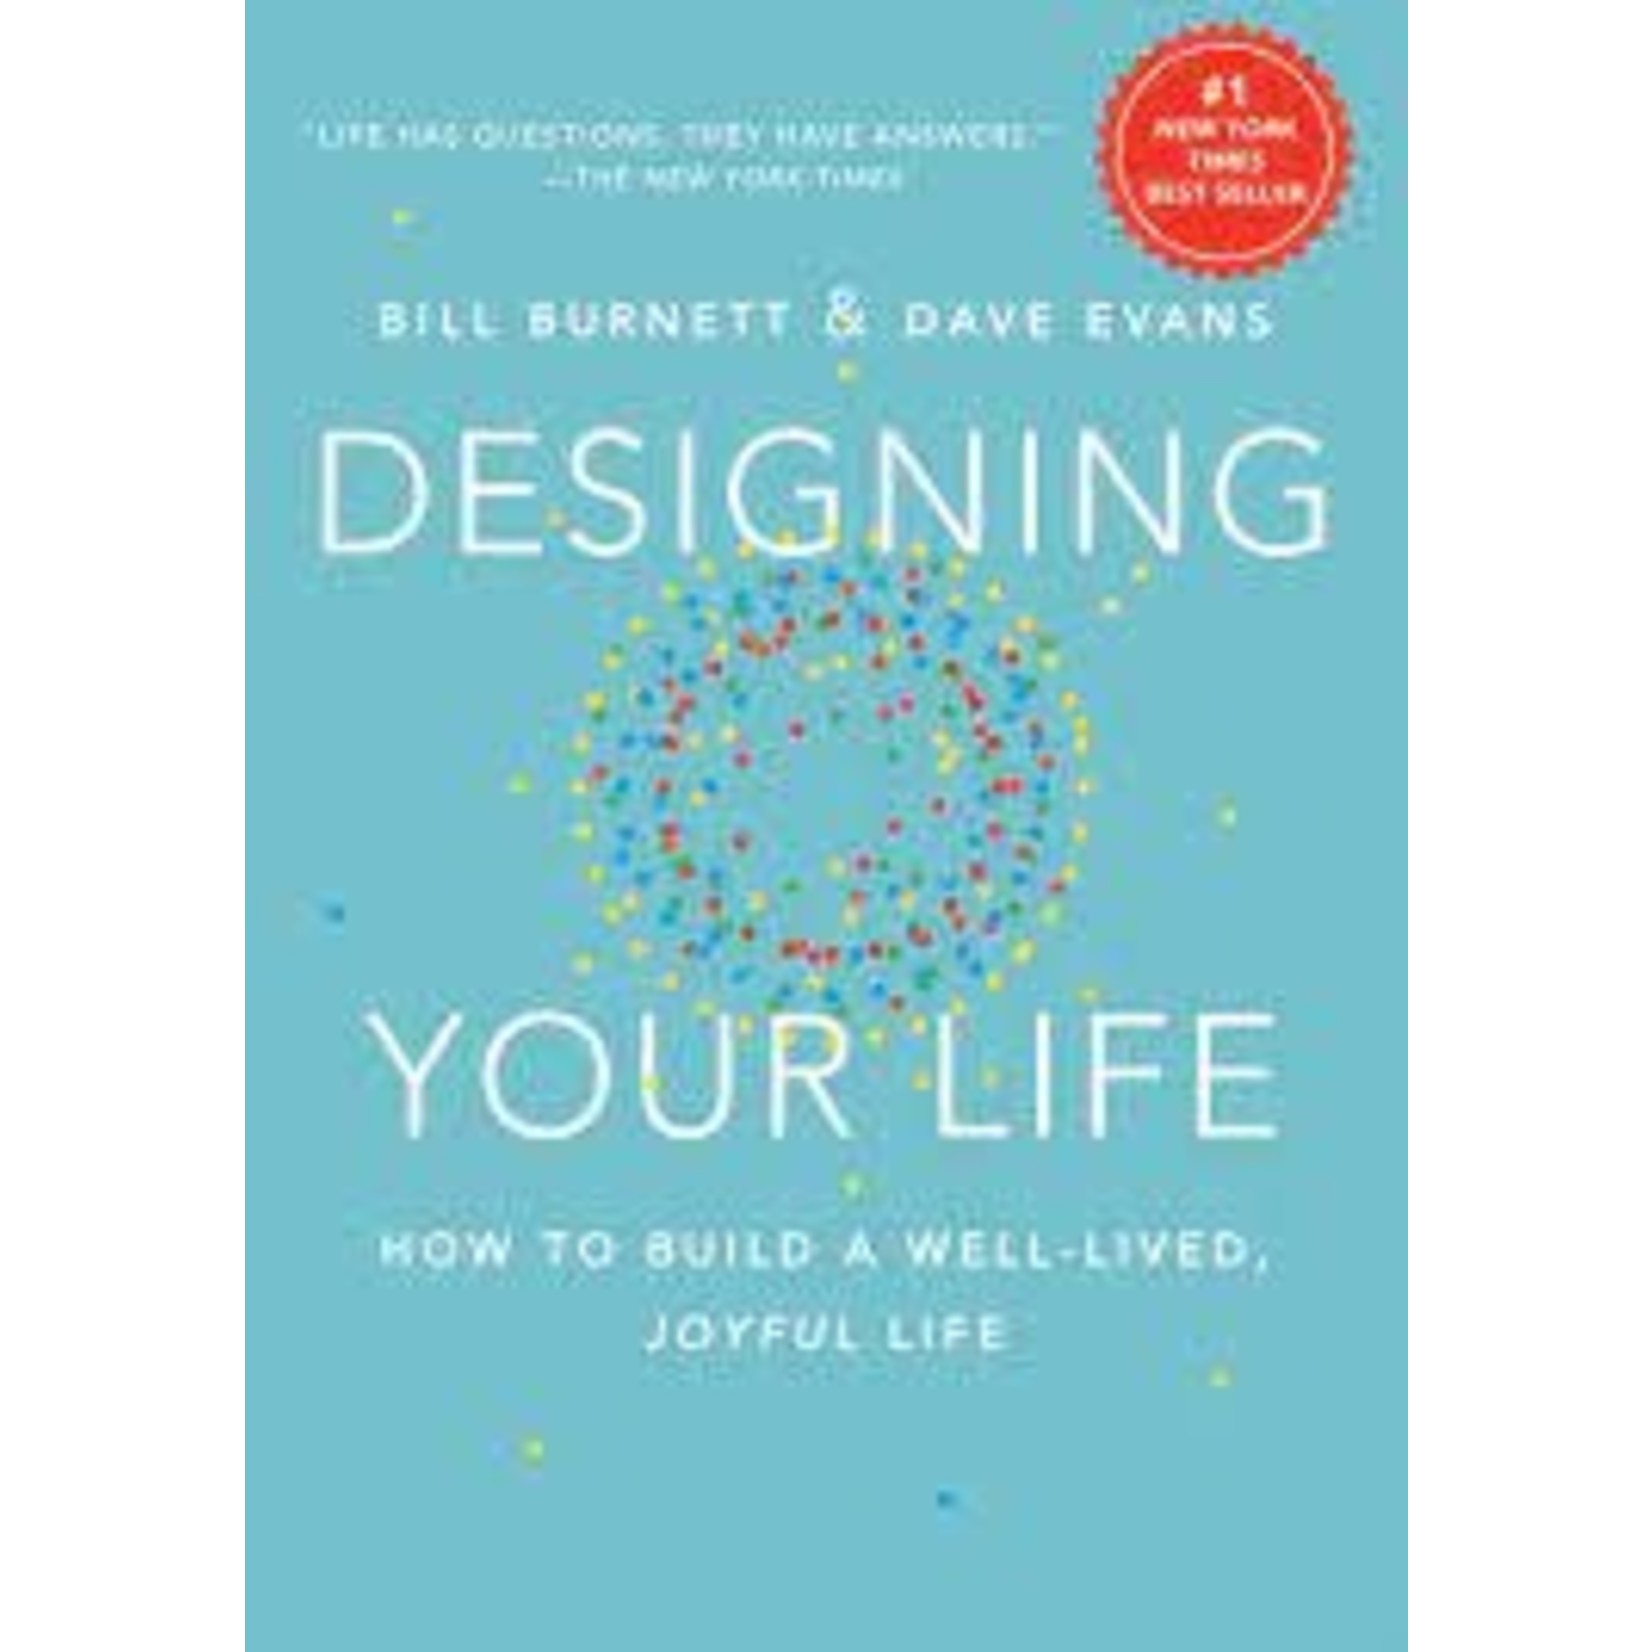 Designing Your Life: How to Build a Well-lived Joyful Life